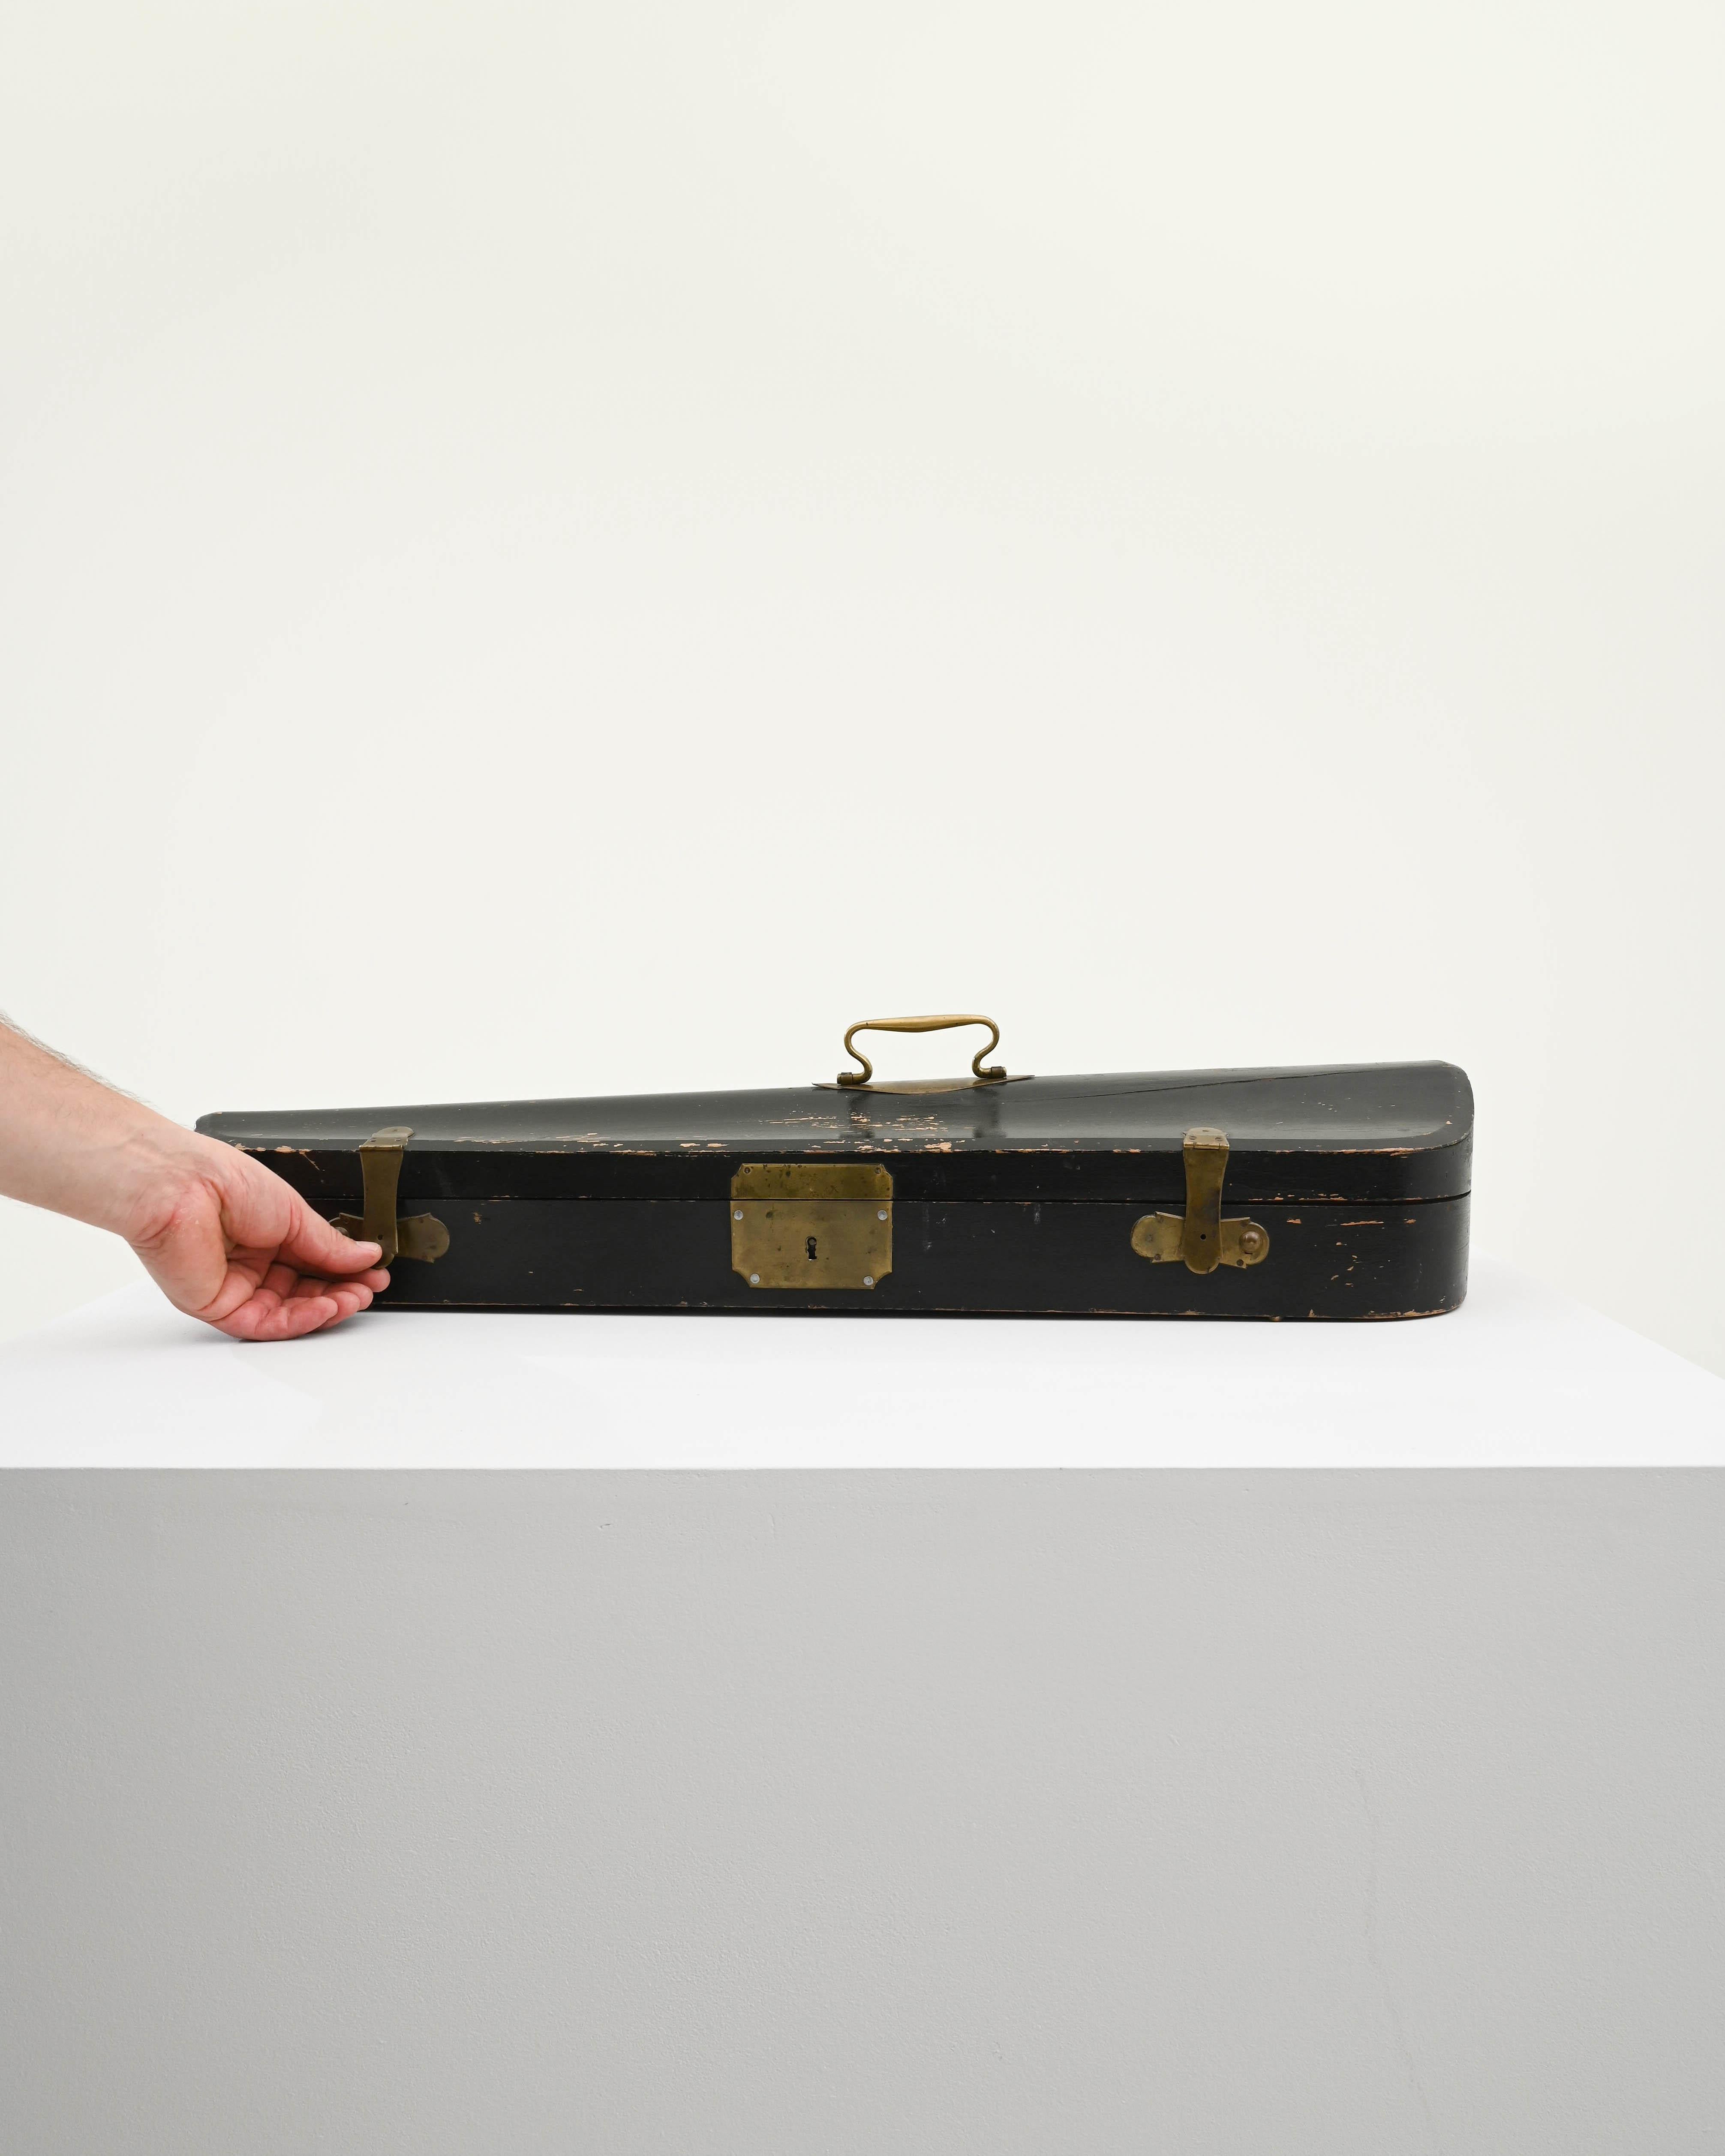 Made in Europe in the 20th Century, this vintage wooden case would have originally been used to hold a musical instrument—the distinctive shape suggests a violin. The wood has been painted in a sober black hue; elegant brass clasps and a gracefully